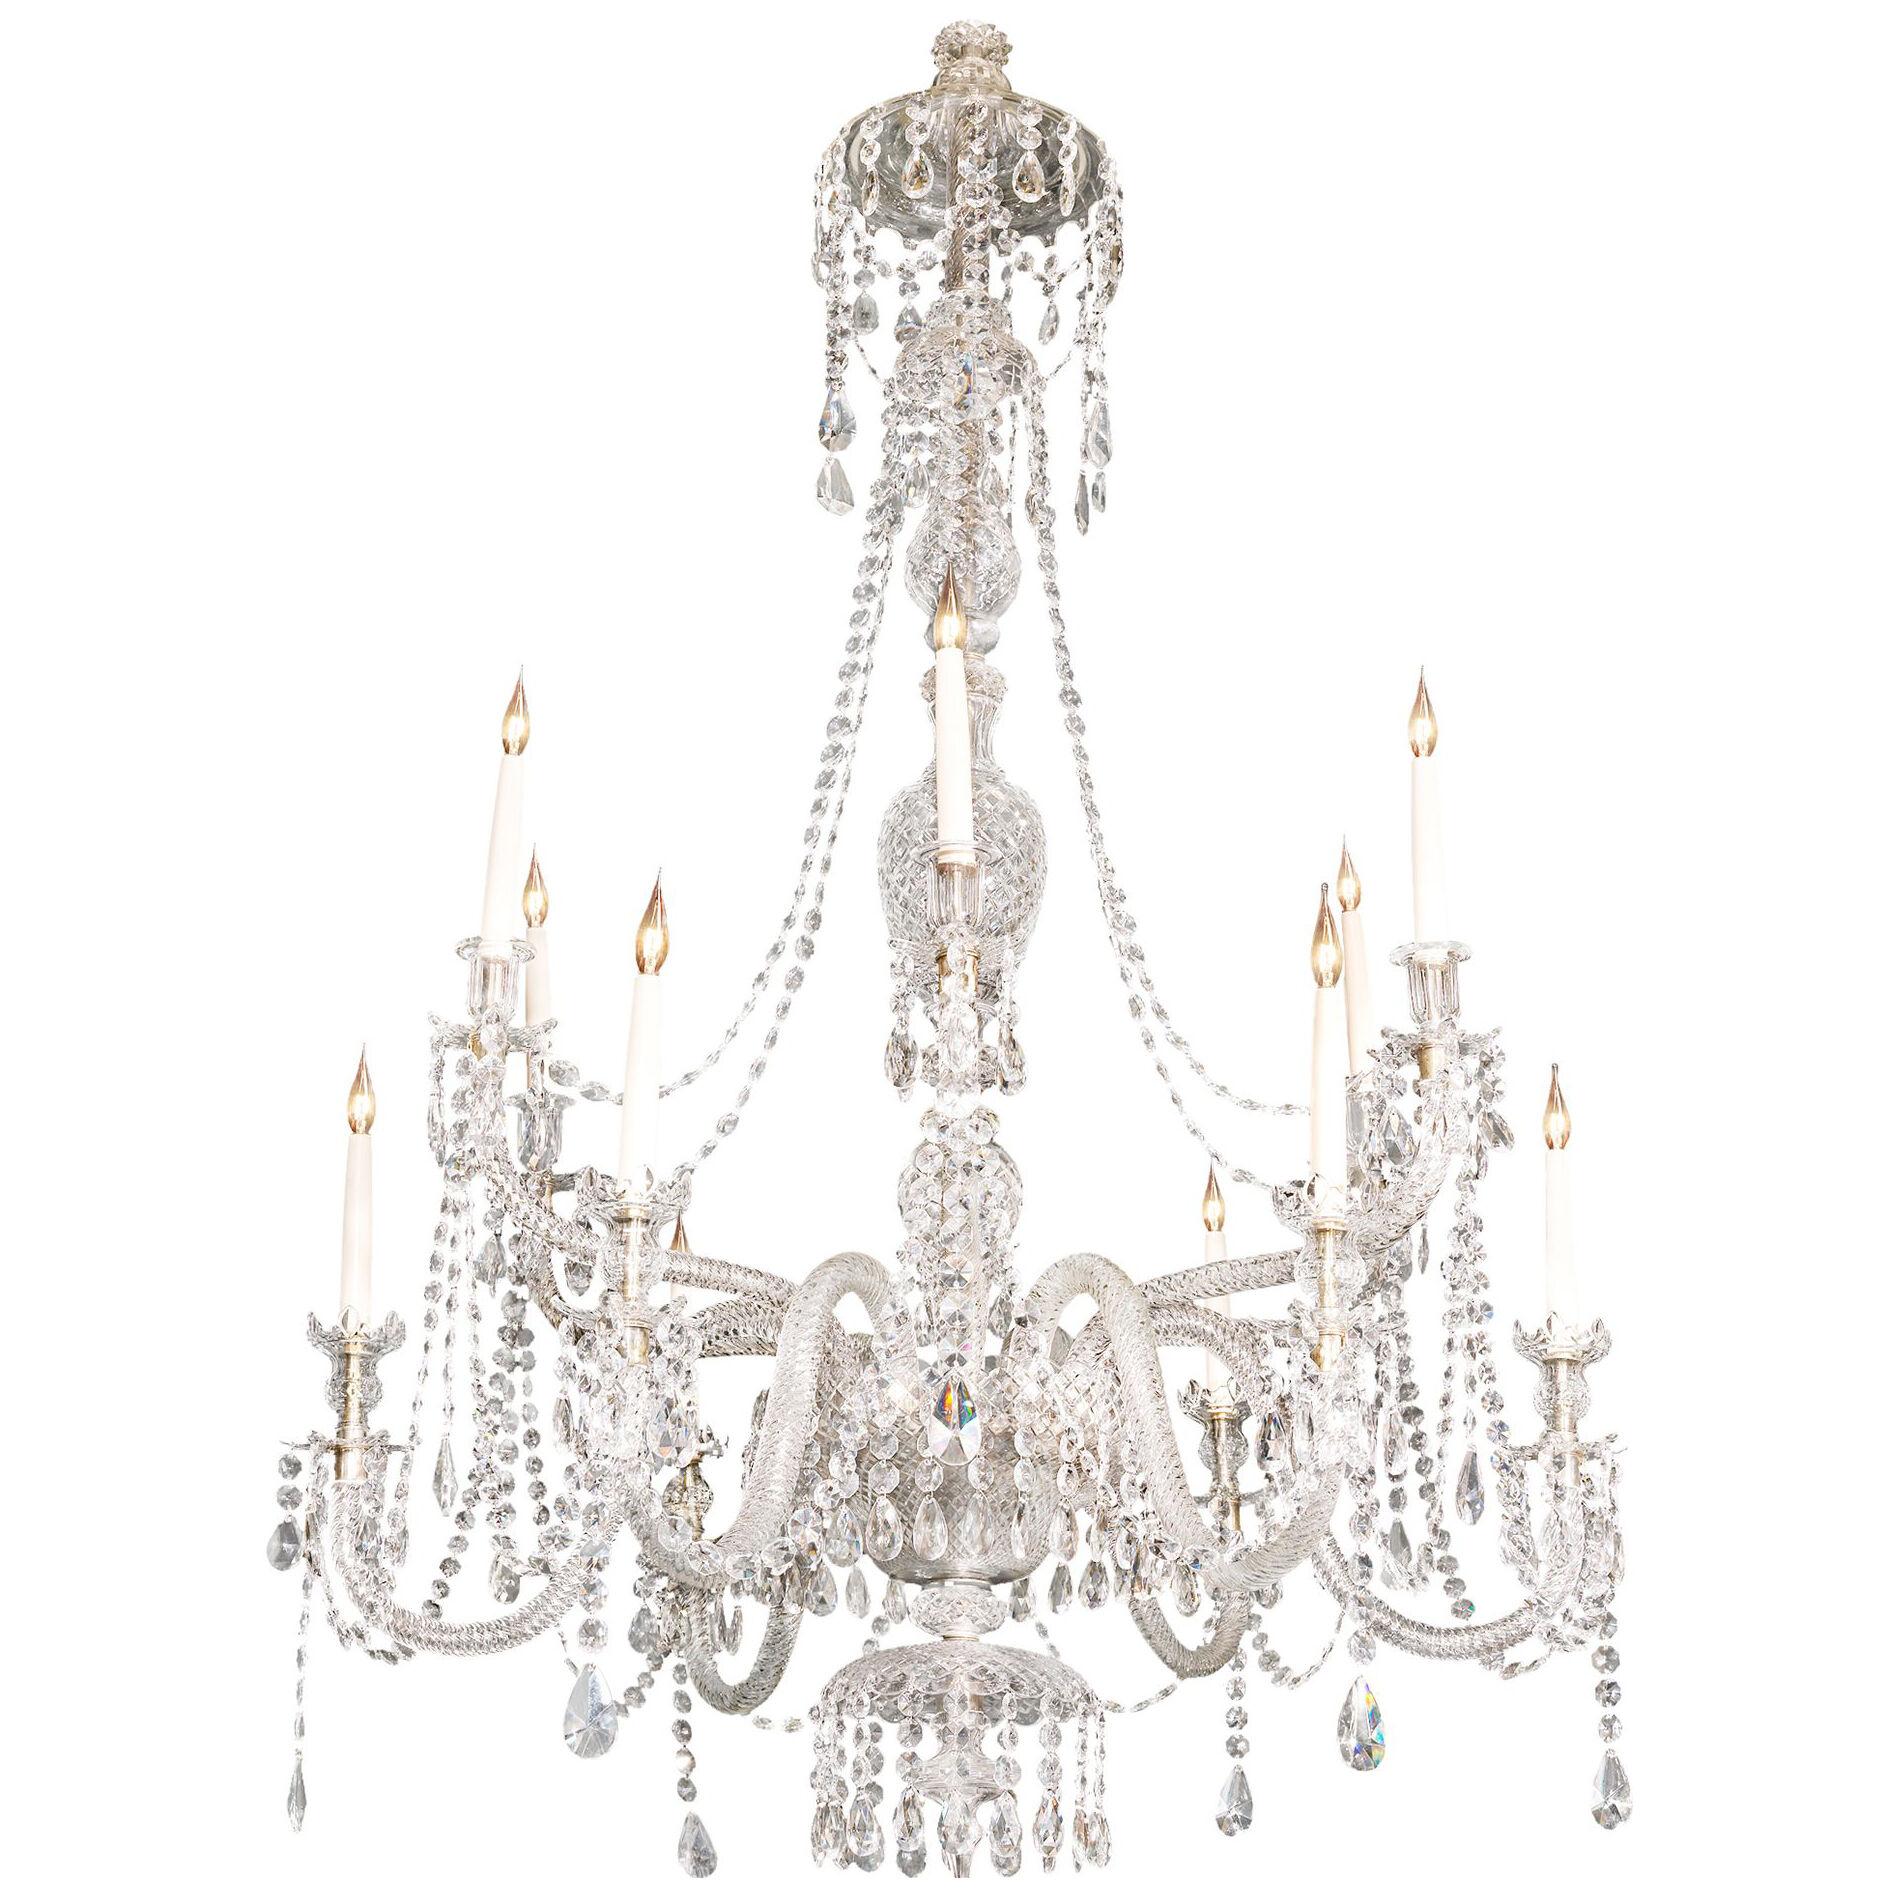 The Curzon Crystal Chandelier